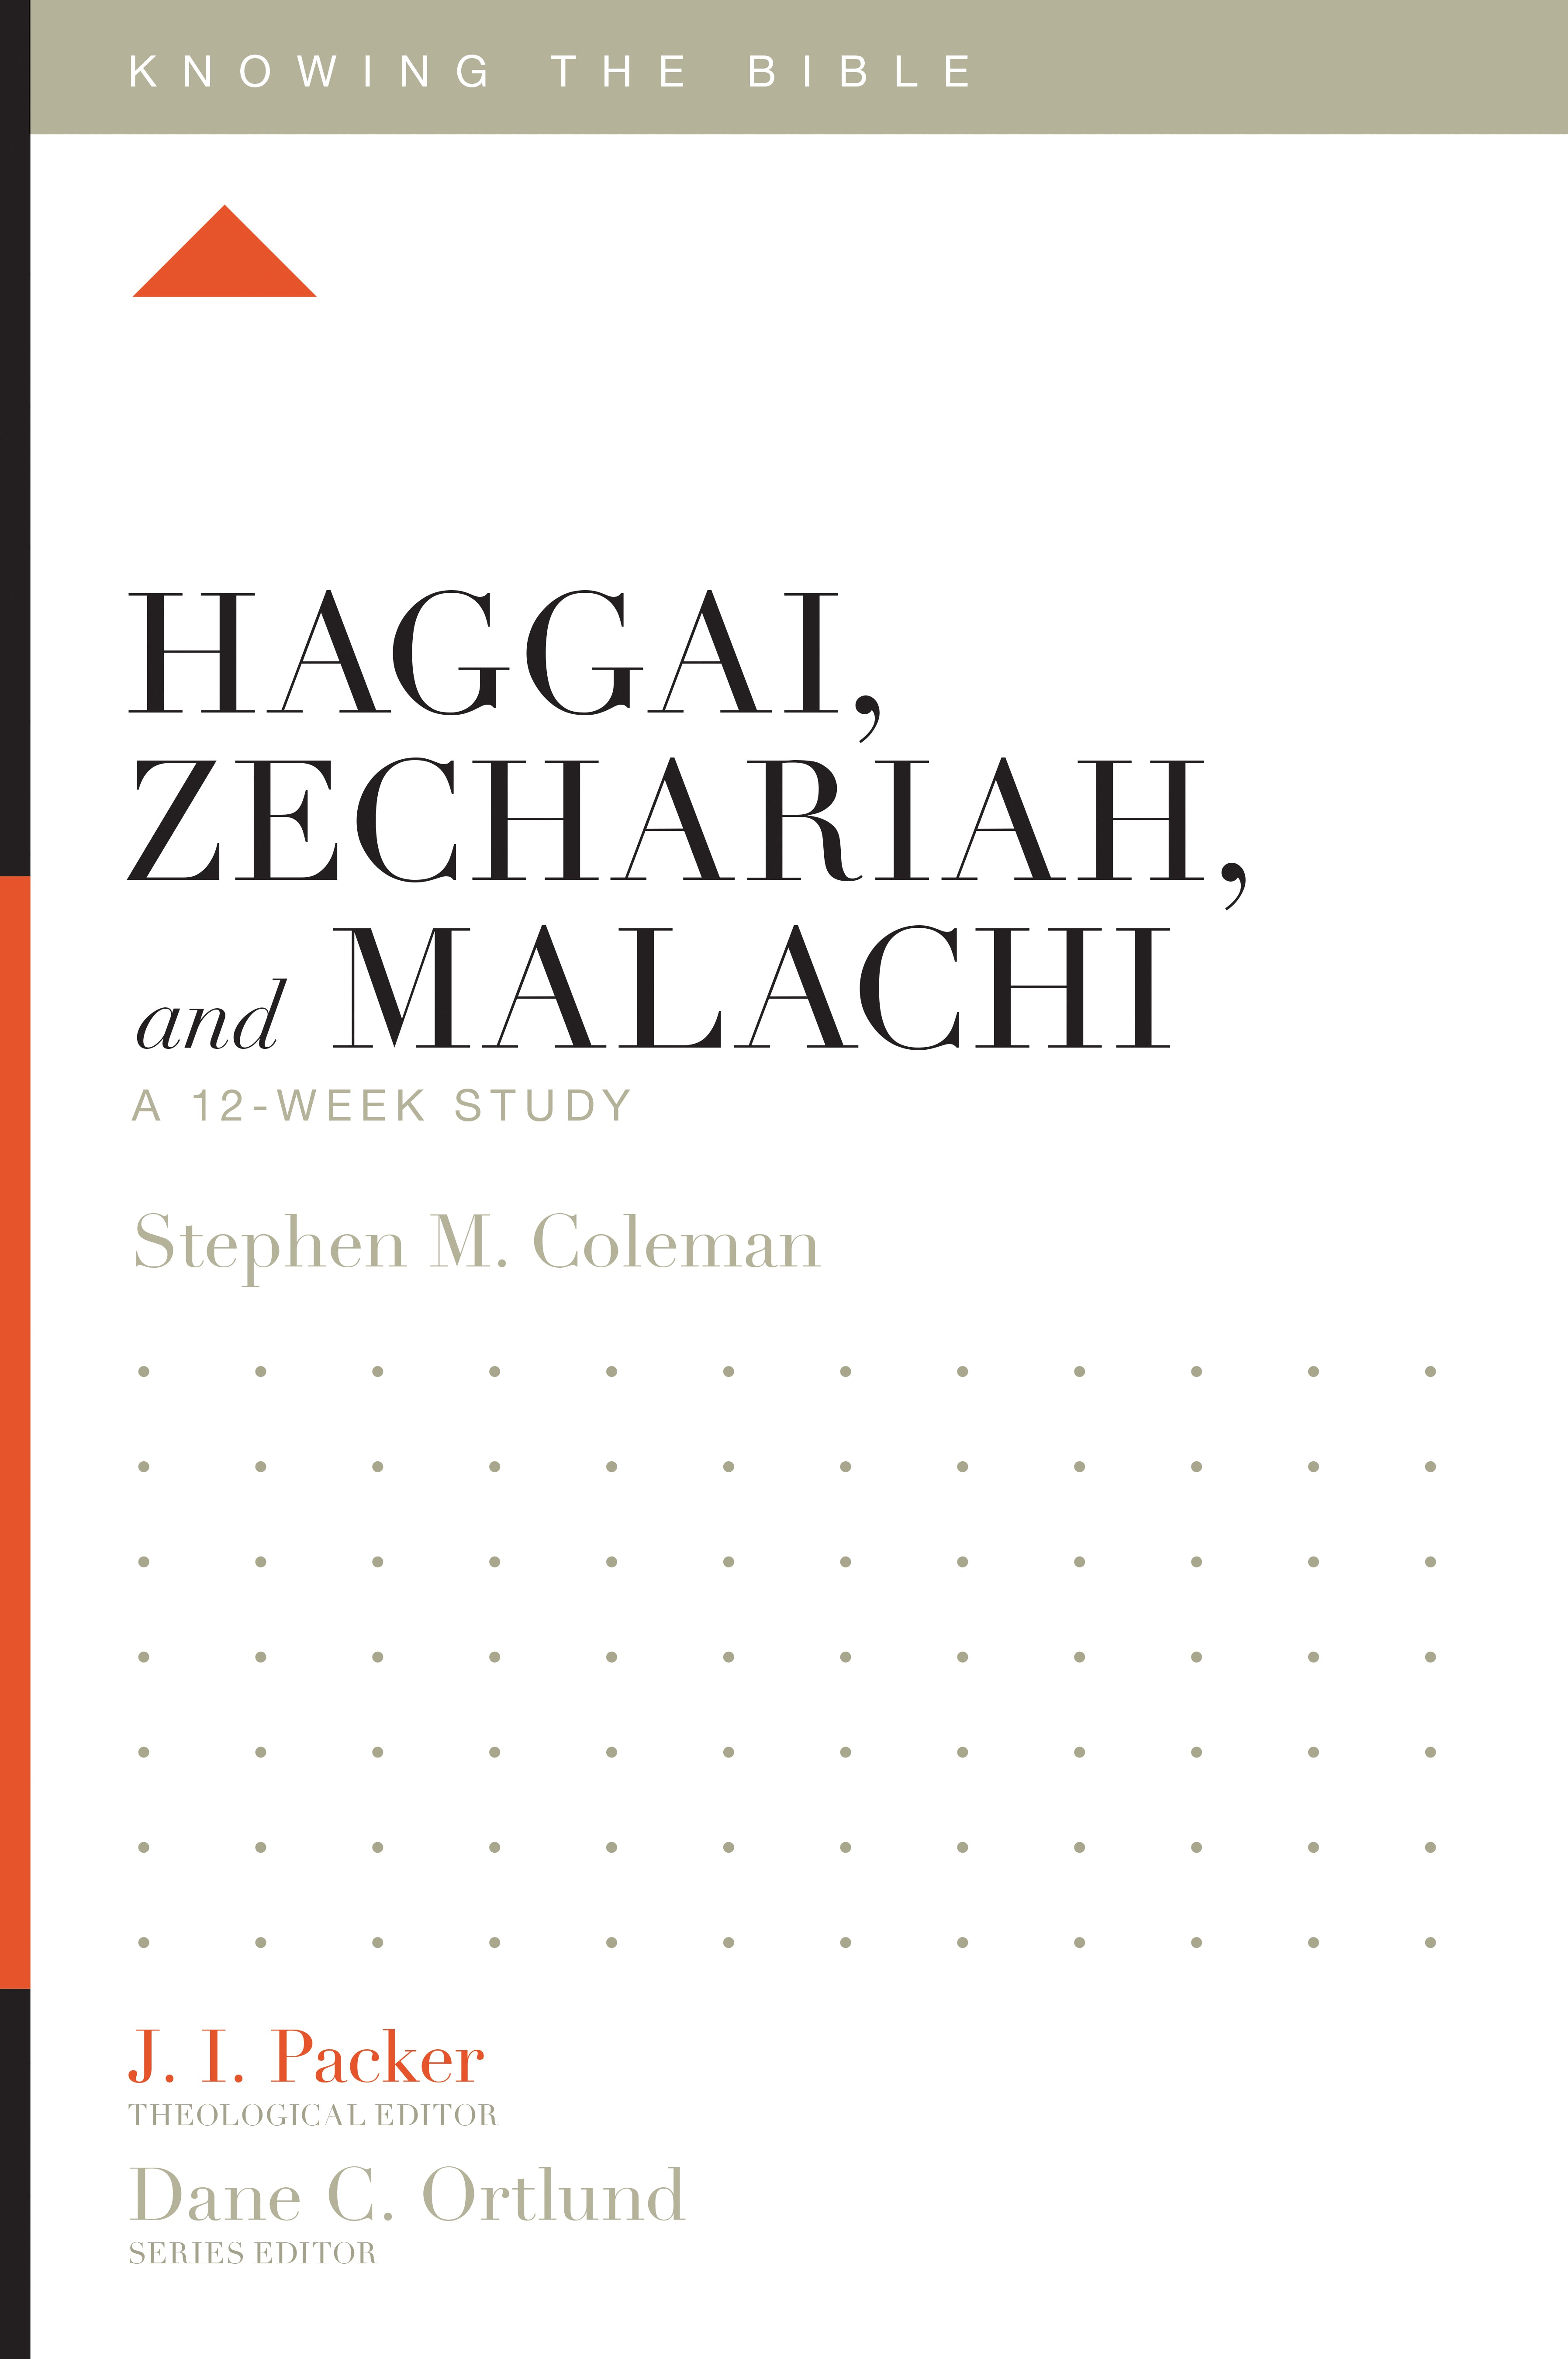 the　and　Westminster　Haggai,　12-Week　–　Malachi:　9781433557330　M.　Study　Zechariah,　Stephen　Coleman,　Bible)　(Knowing　A　Bookstore